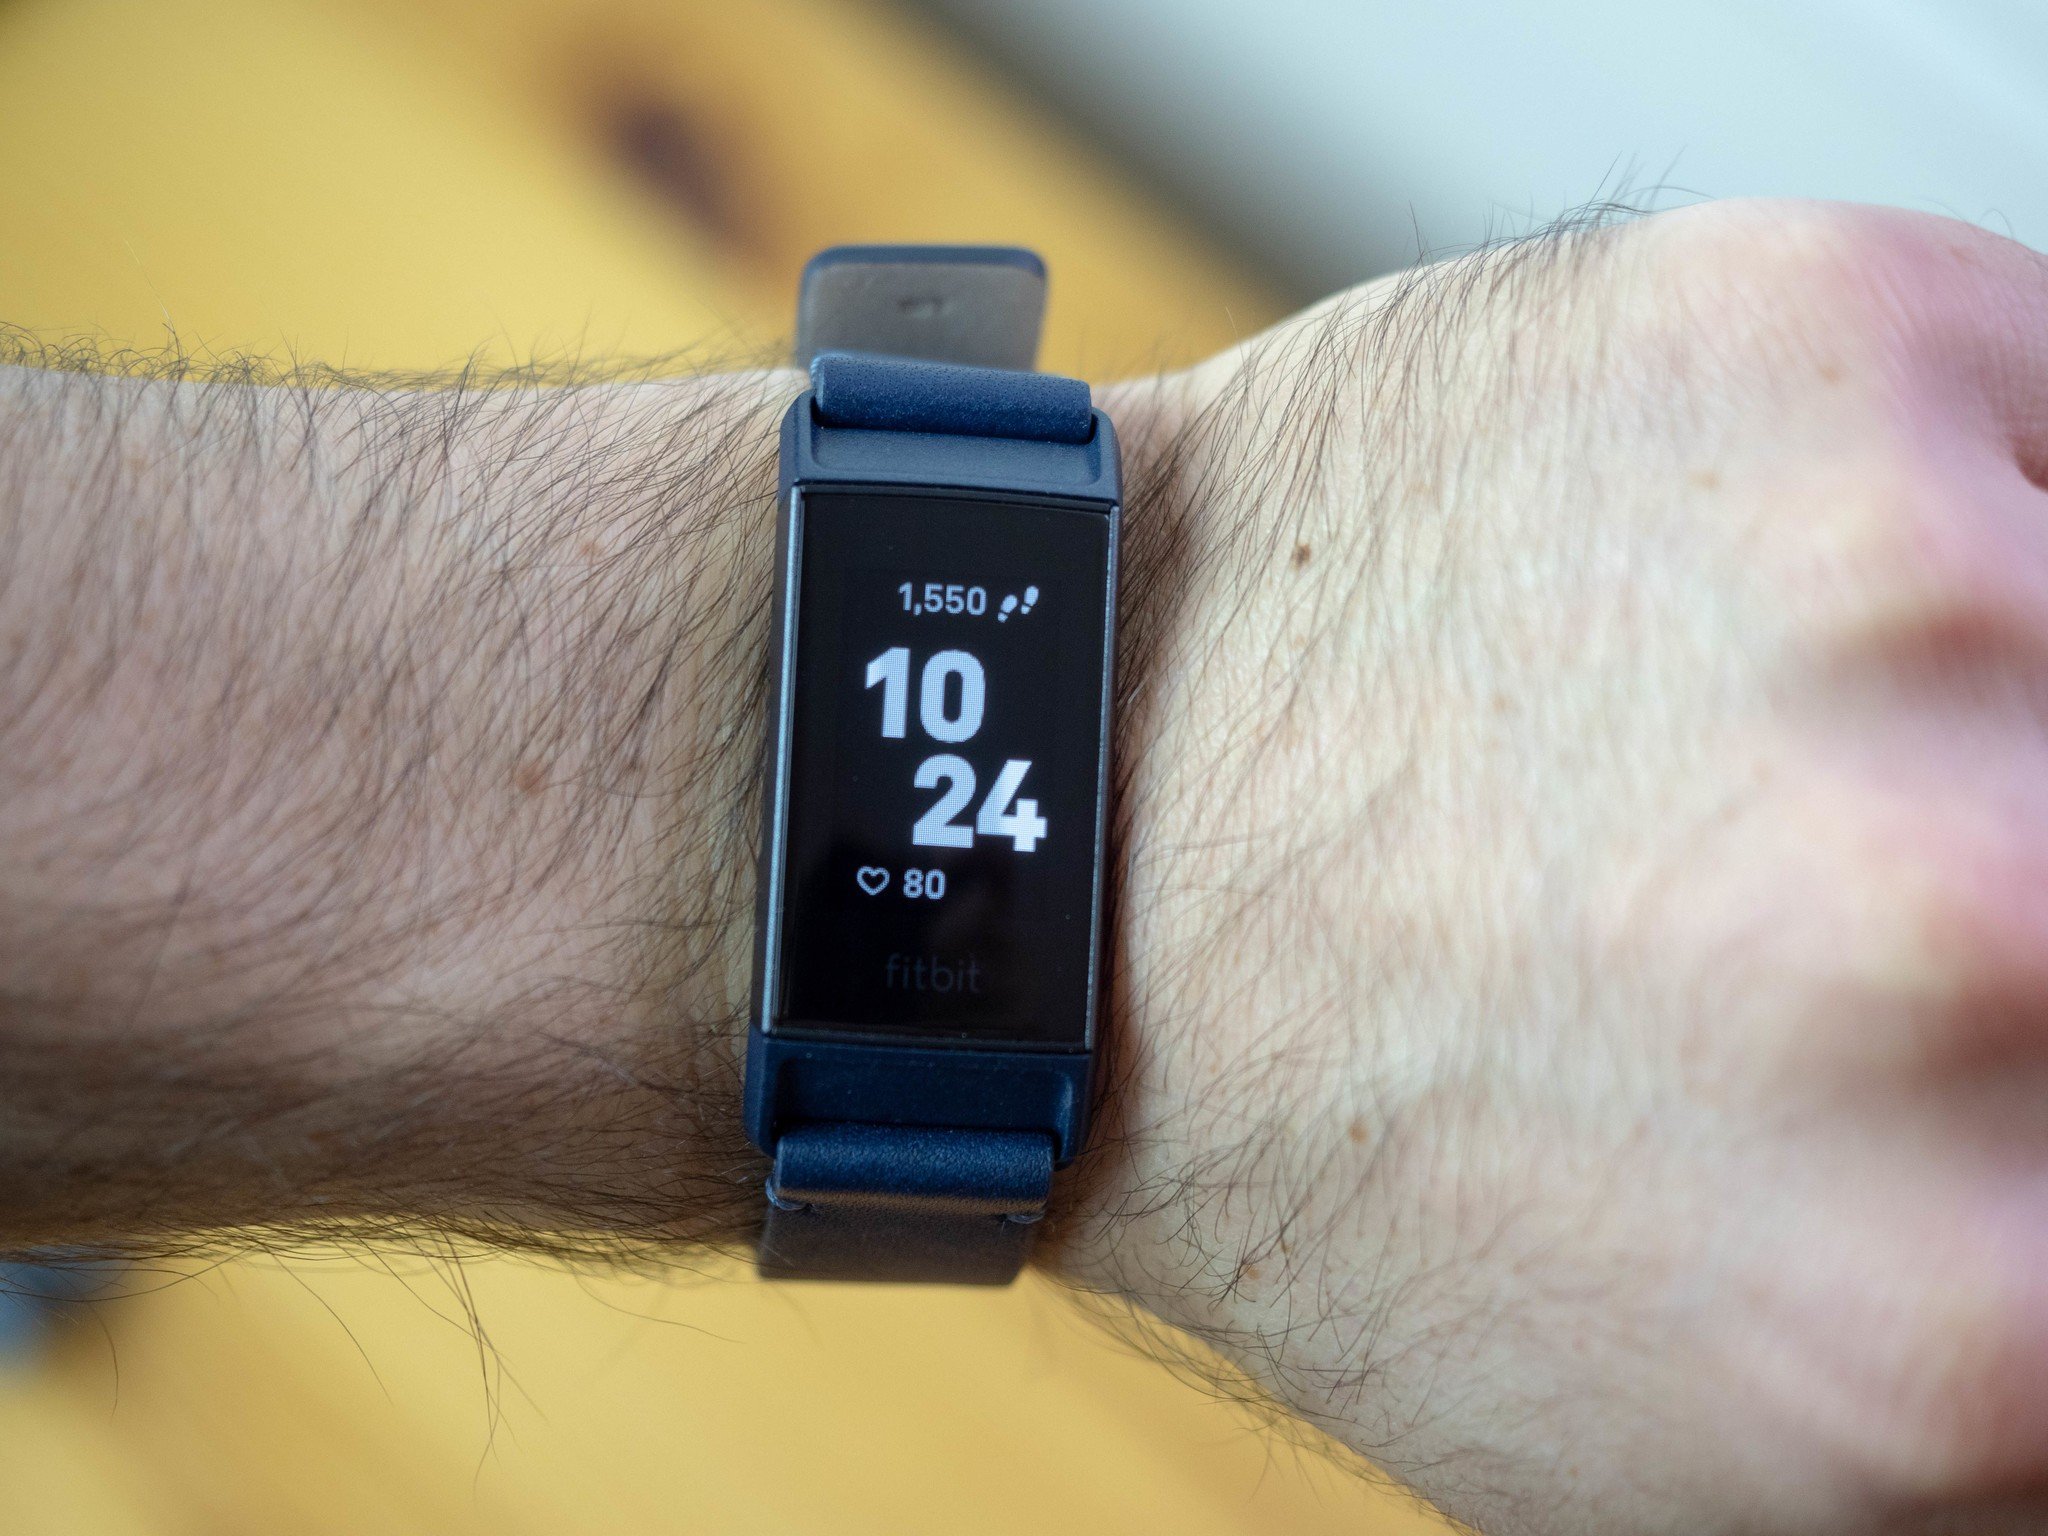 fitbit charge 3 vs galaxy fit